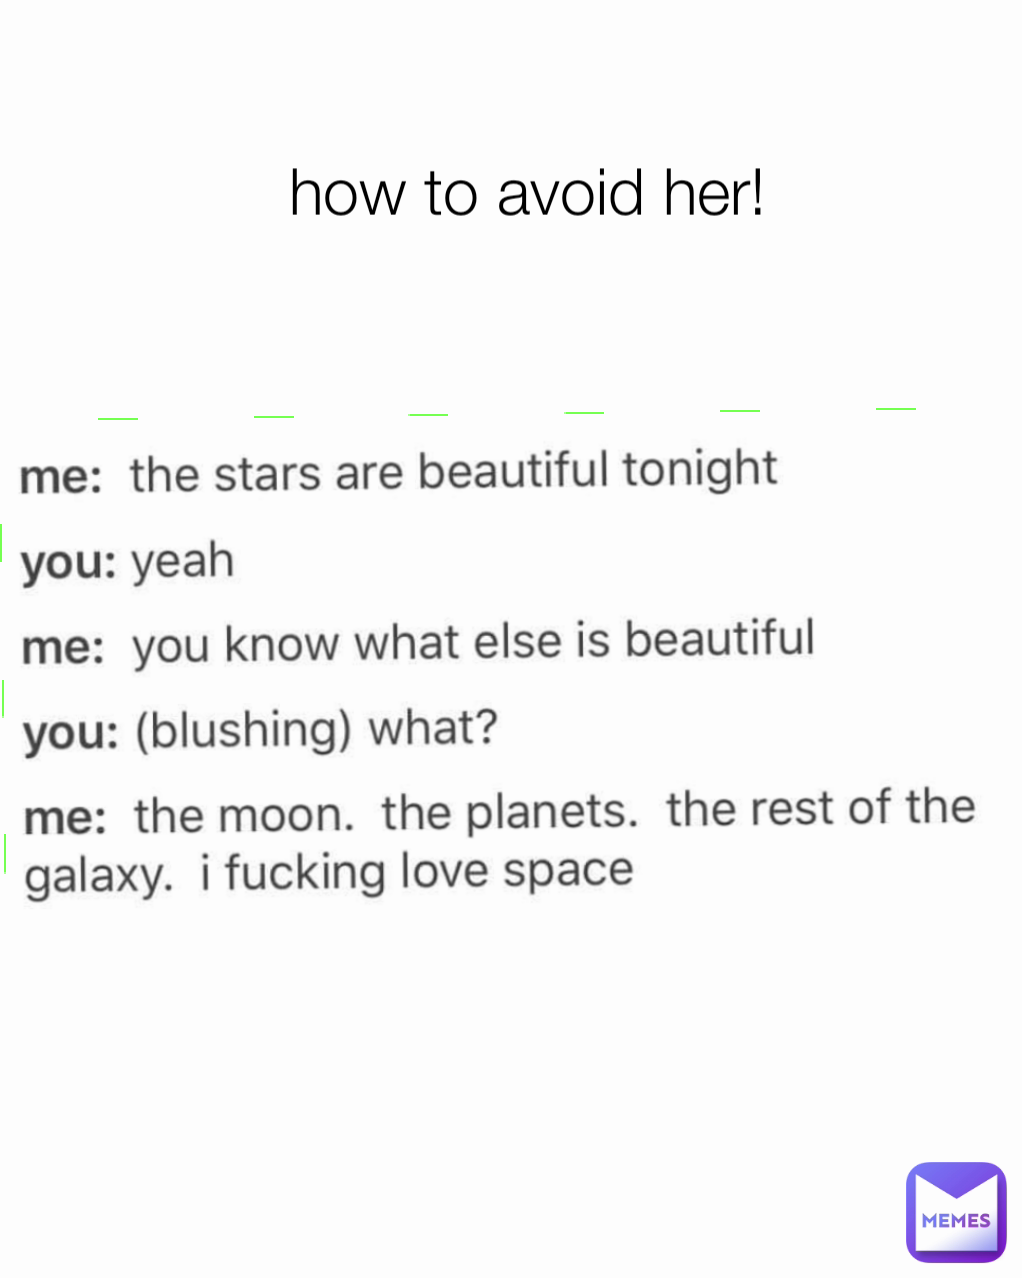 how to avoid her!